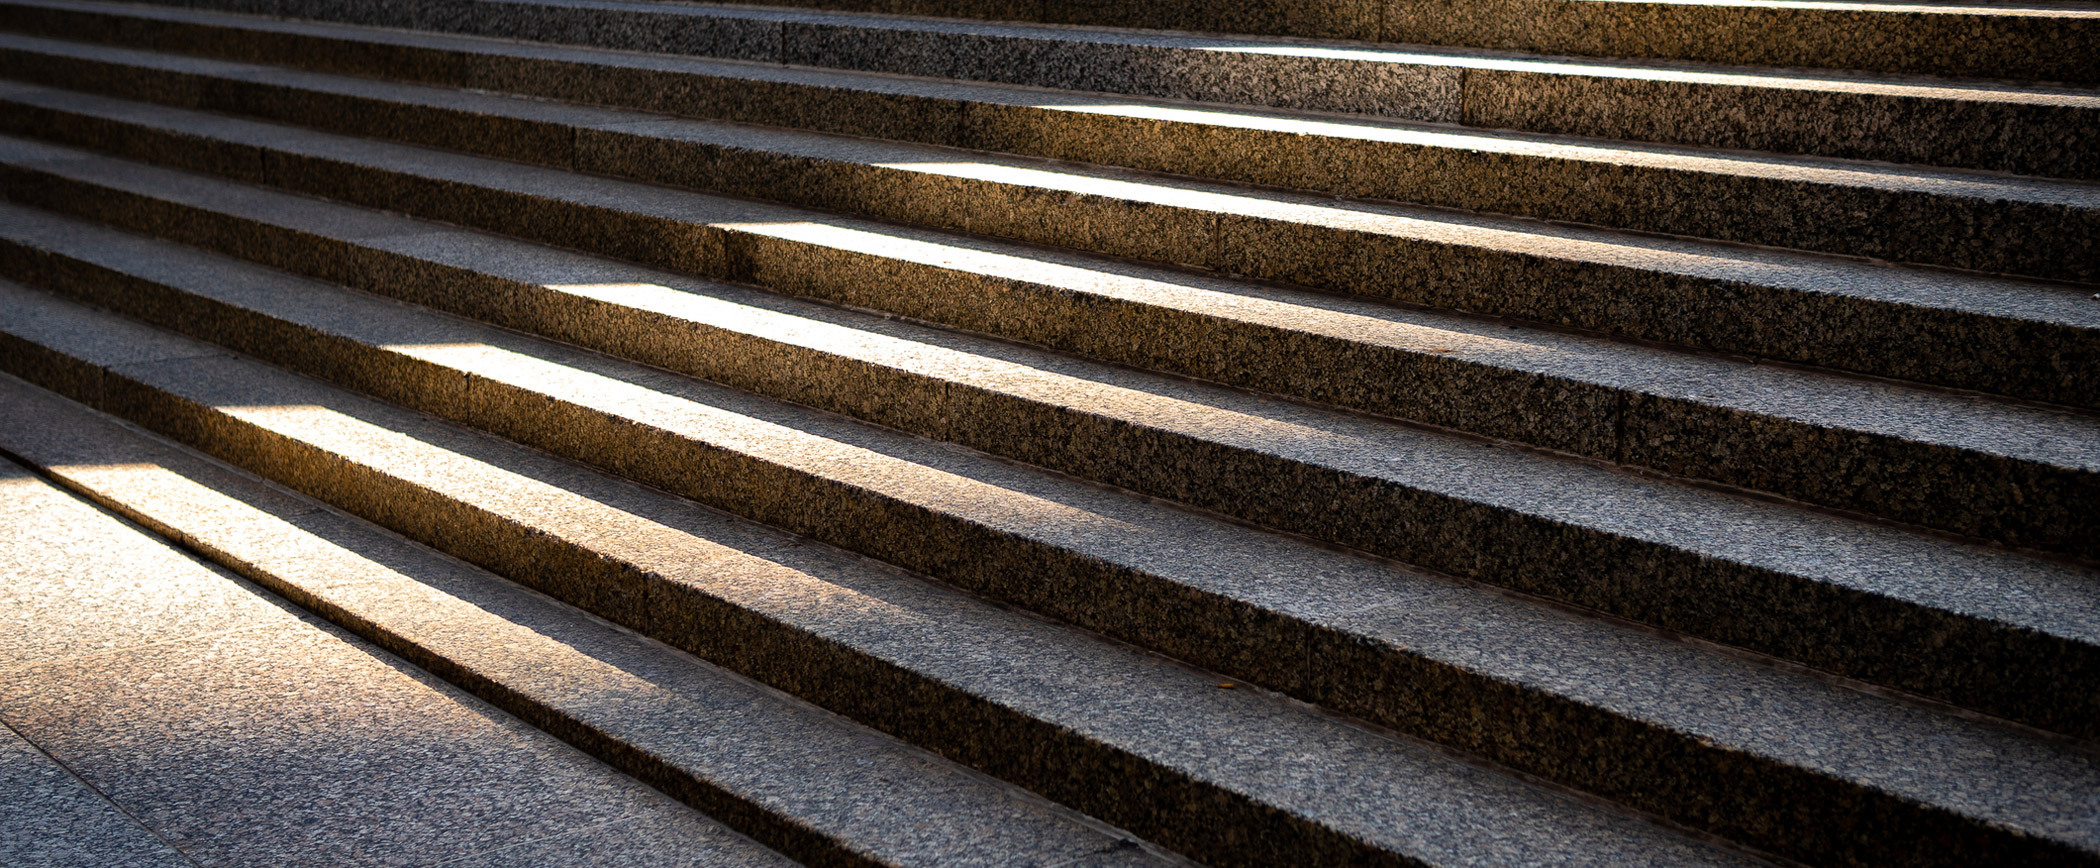 Close-up view of sunlit stone steps.